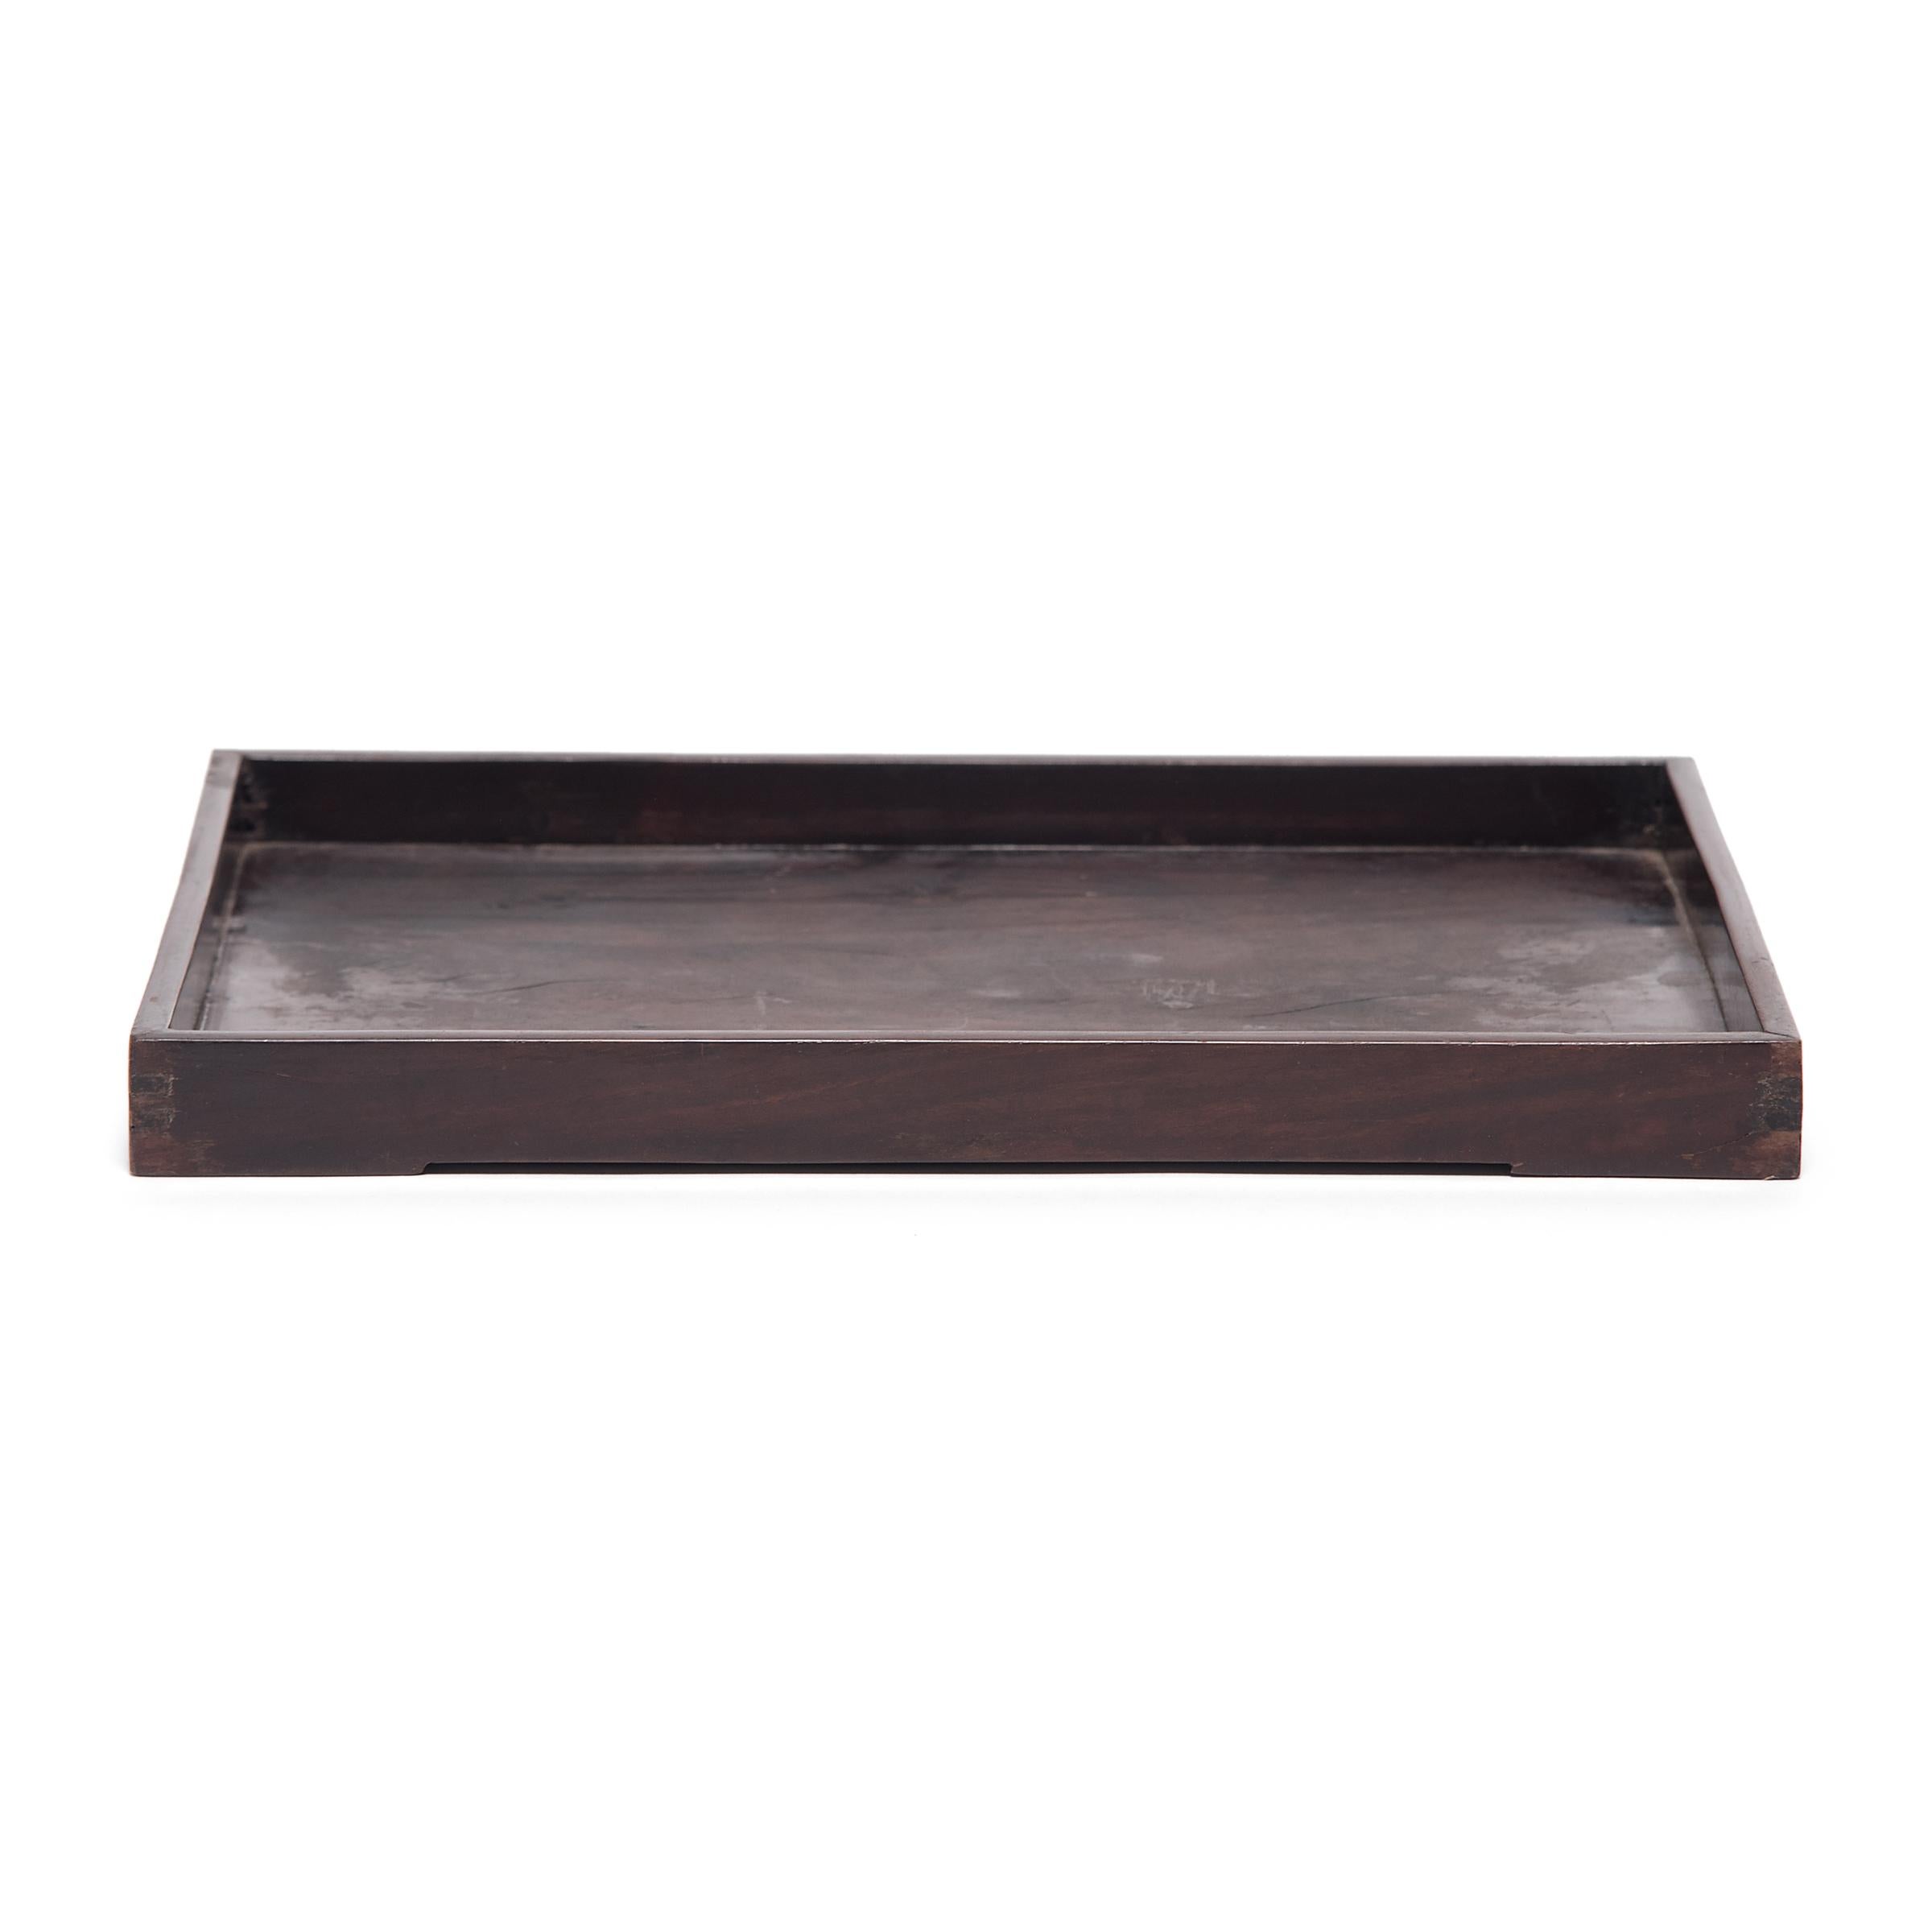 Crafted of fine blackwood, also known as hongmu, this 19th century tray once served tea or displayed calligraphy tools in a scholar's studio. Framed with low sides, the tray has a simple rectangular form to showcase the rich dark color and fine